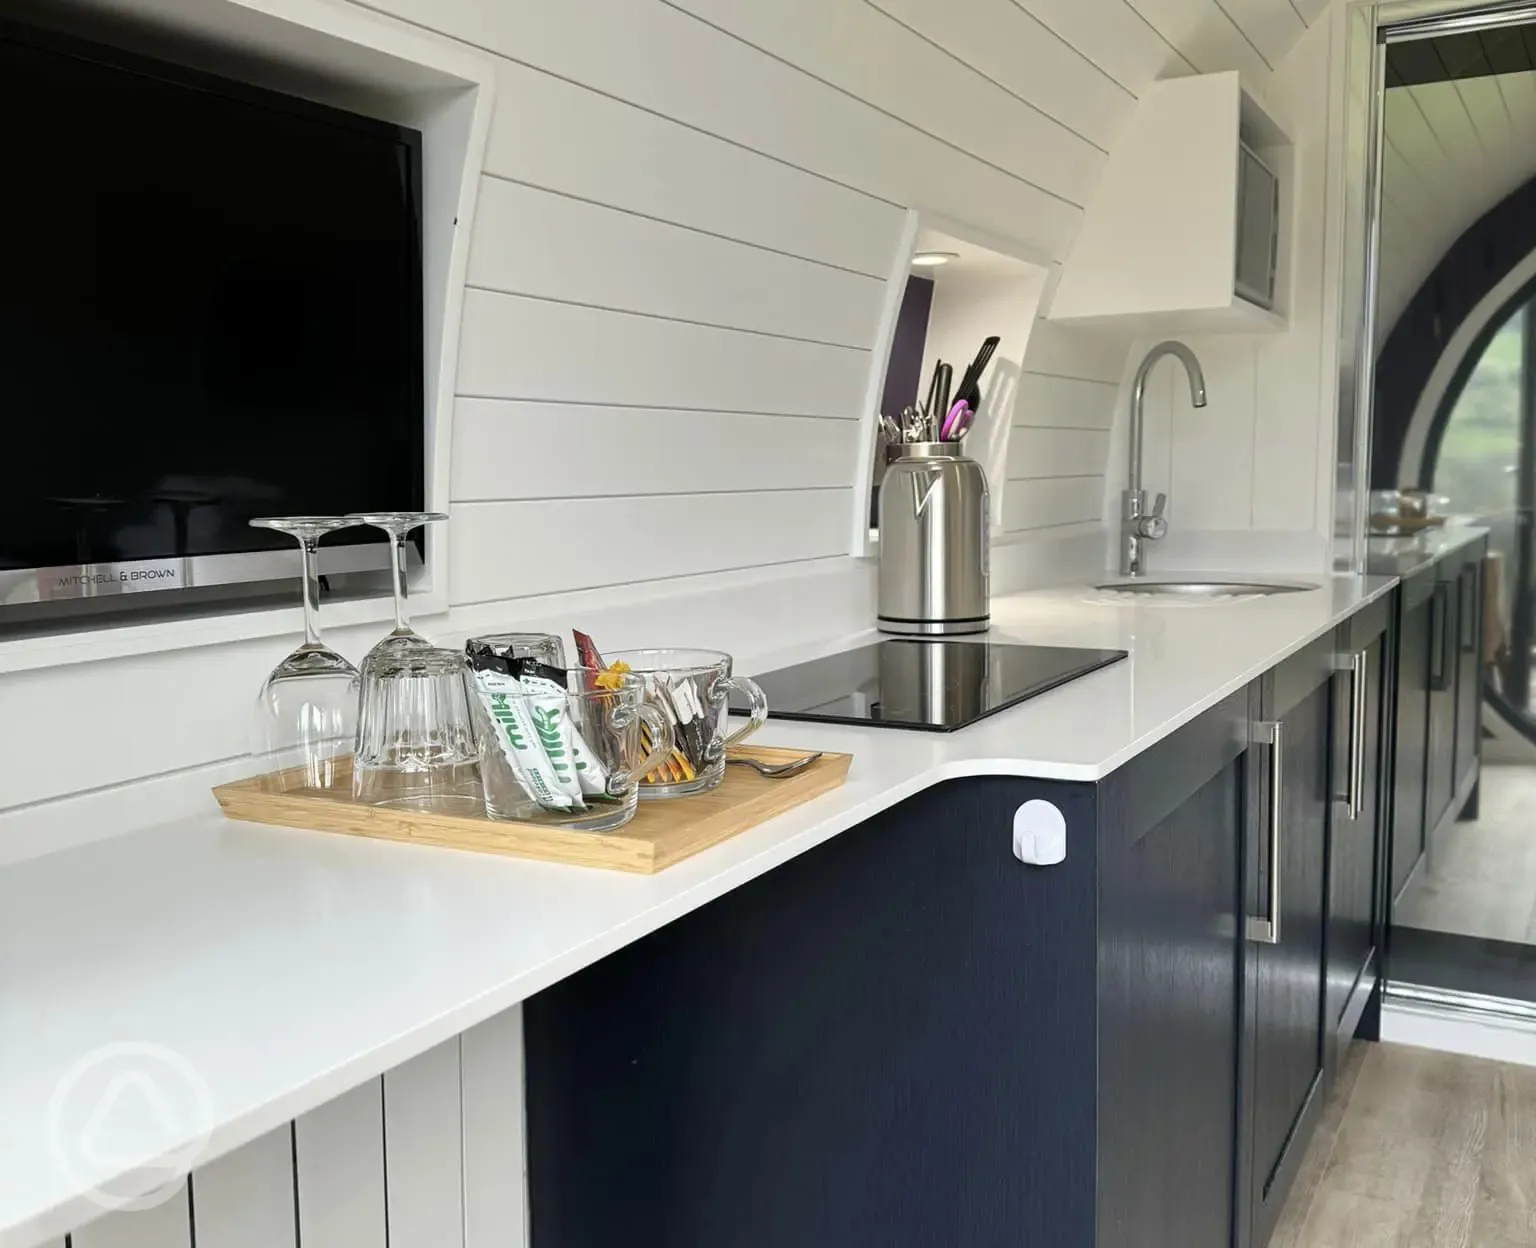 Glamping pod kitchen with microwave, induction hob, fridge, sink and air fryer